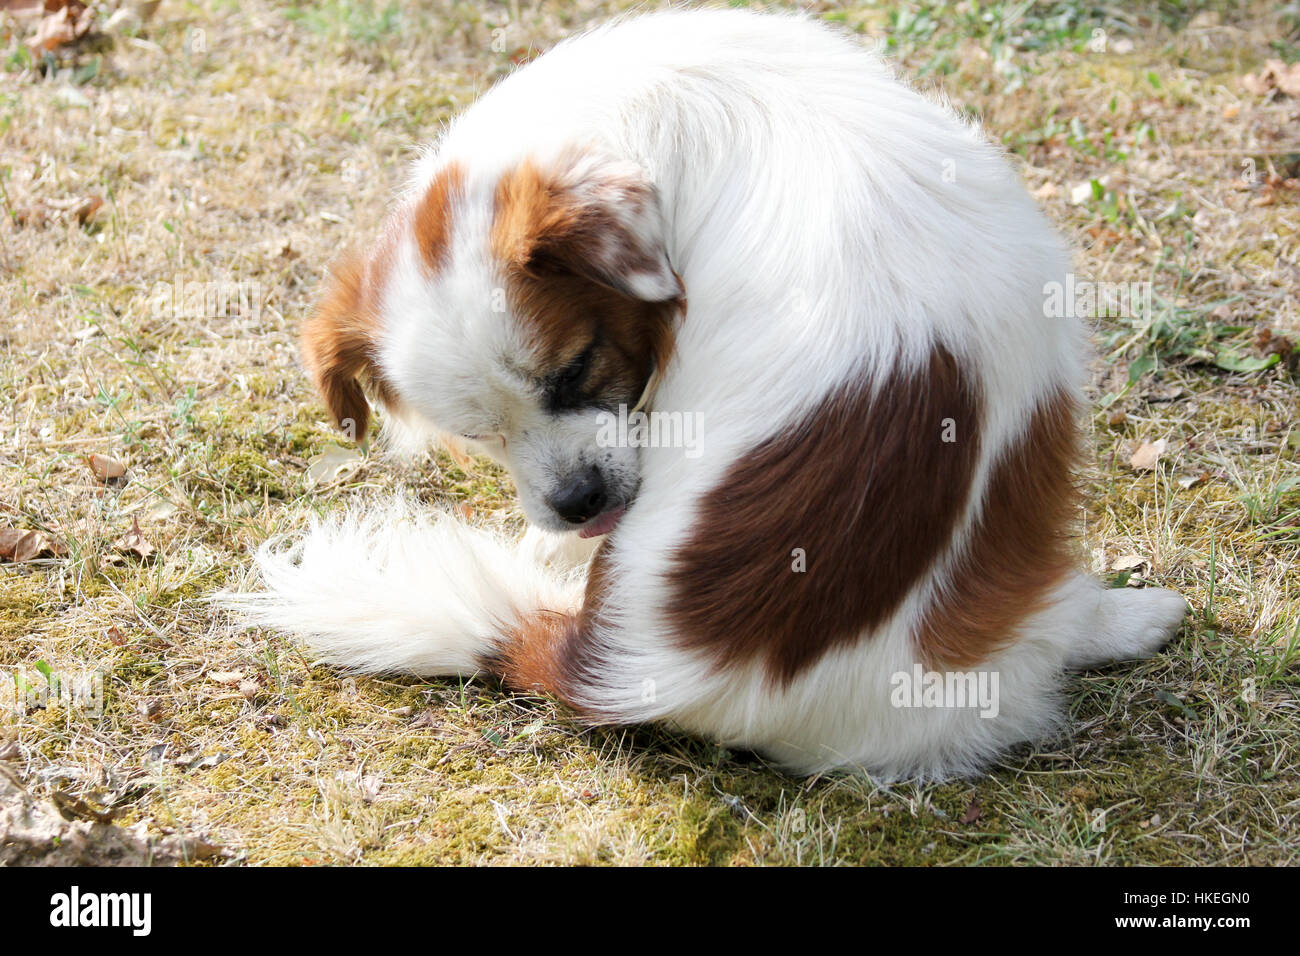 Cute white dog with brown spots licking its tail Stock Photo